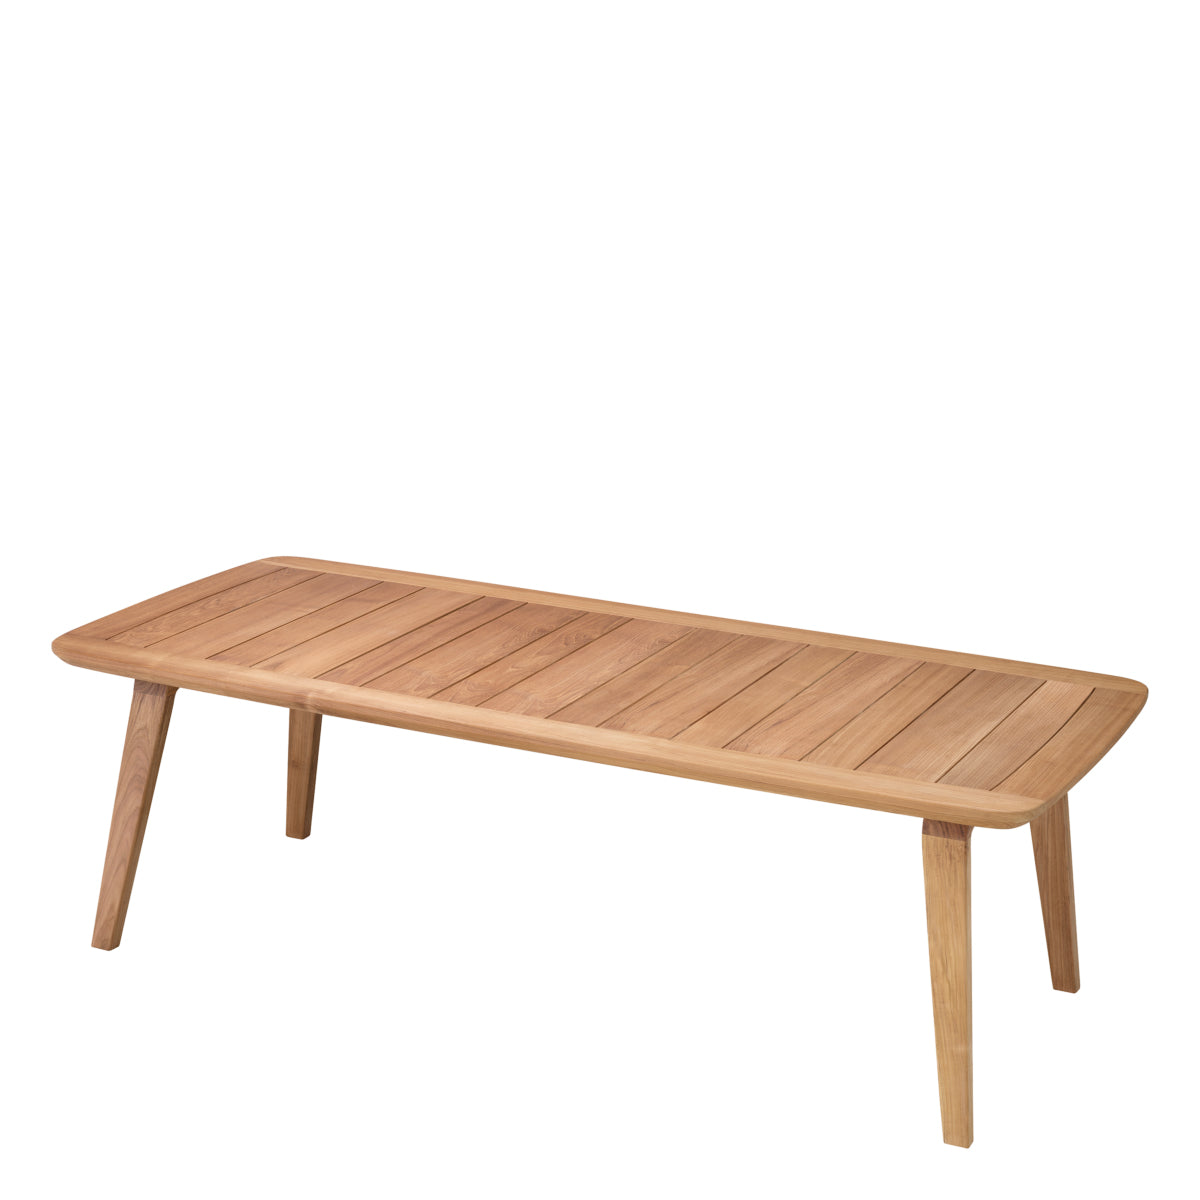 Outdoor dining table Eichholtz Glover Natural